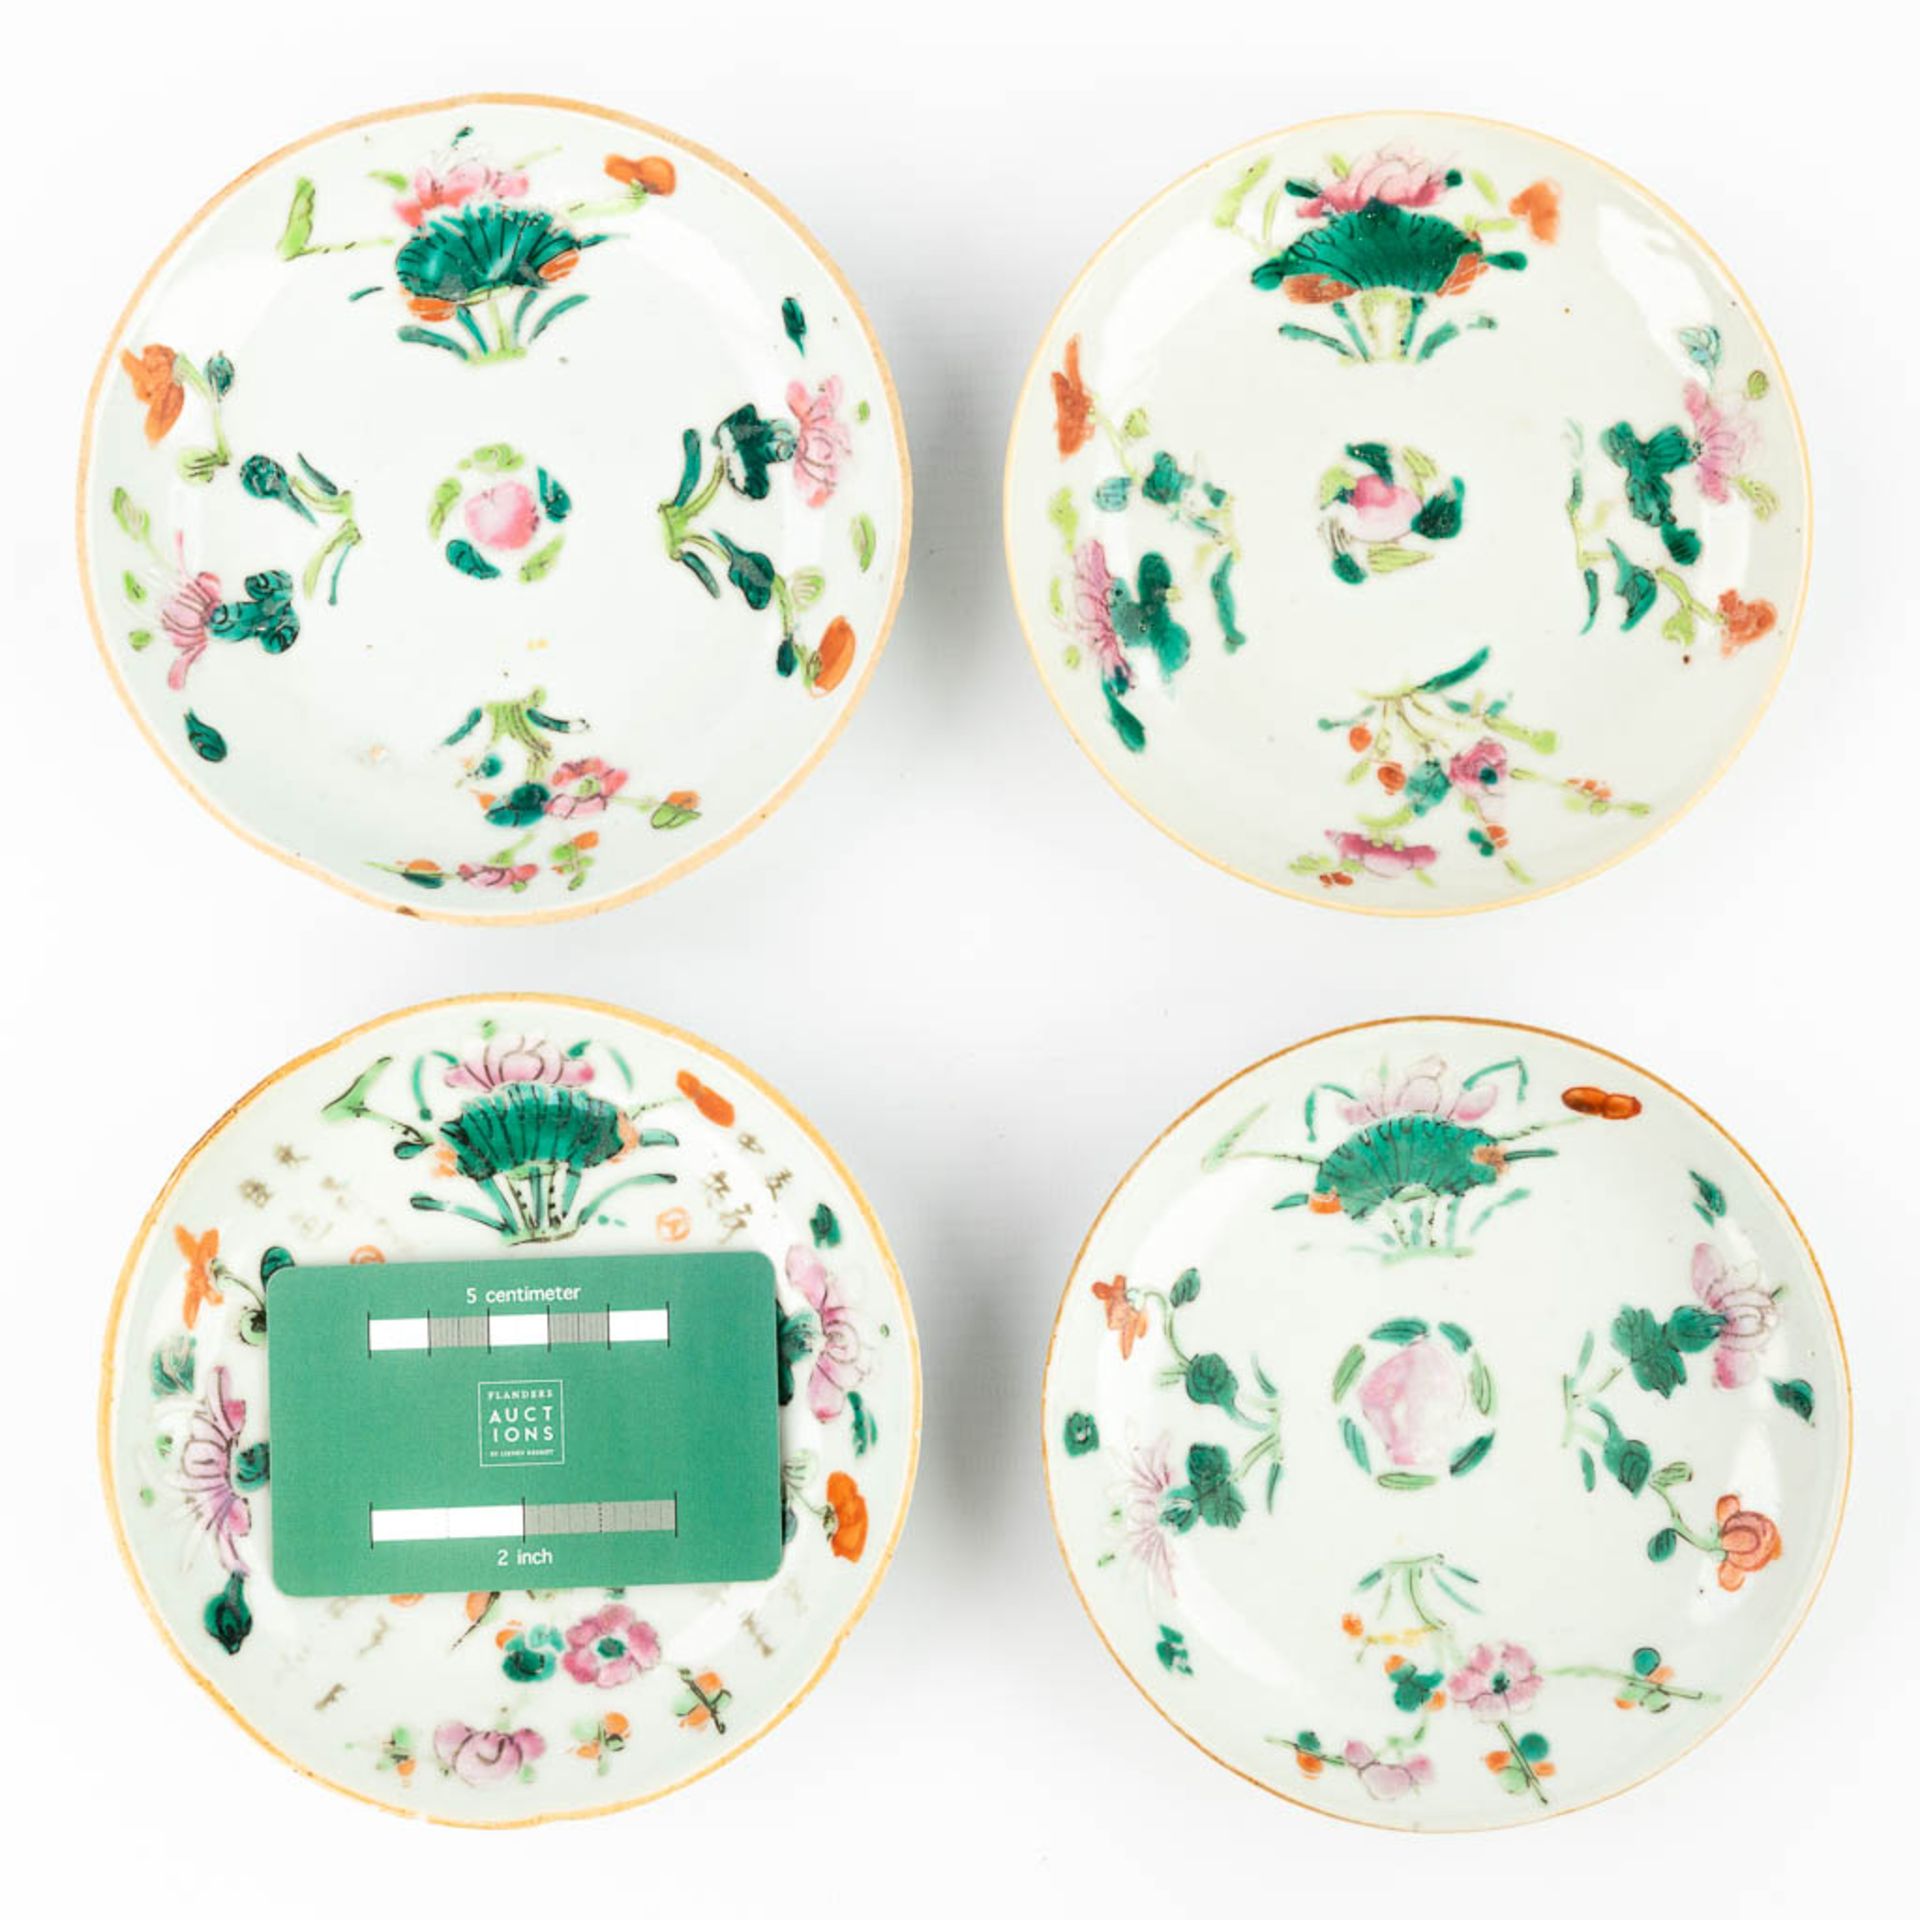 A set of 4 Chinese plates made of porcelain and decorated with peaches and flowers. (13,7 cm) - Image 9 of 14